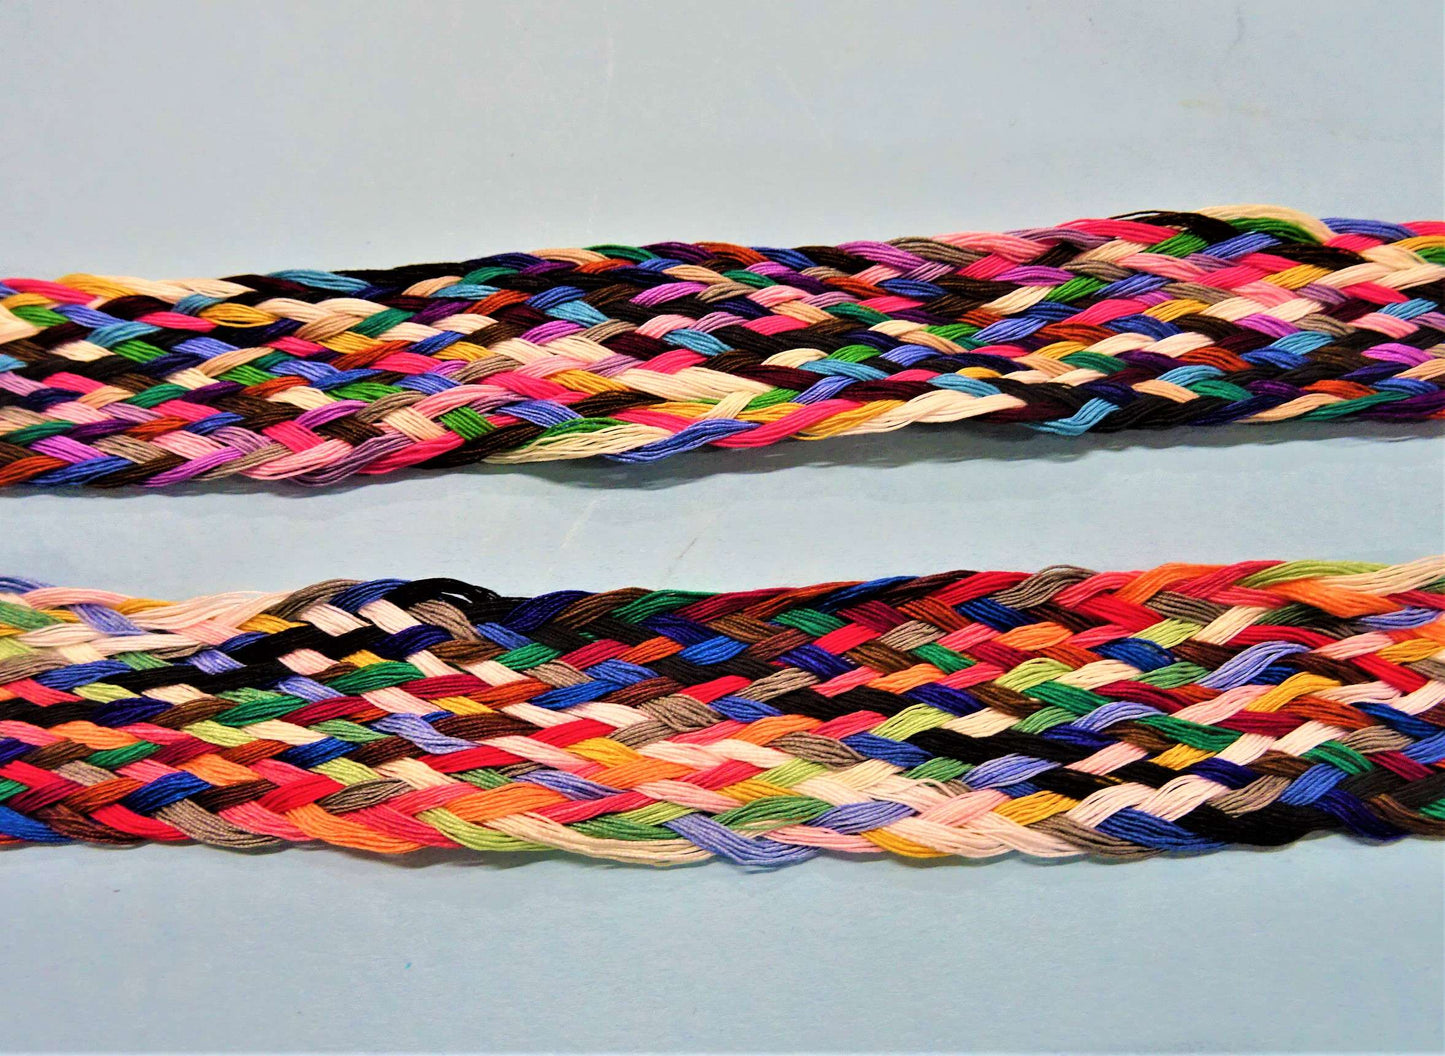 10 plaits of thread 40cm long assorted colours loose in a bag clearance